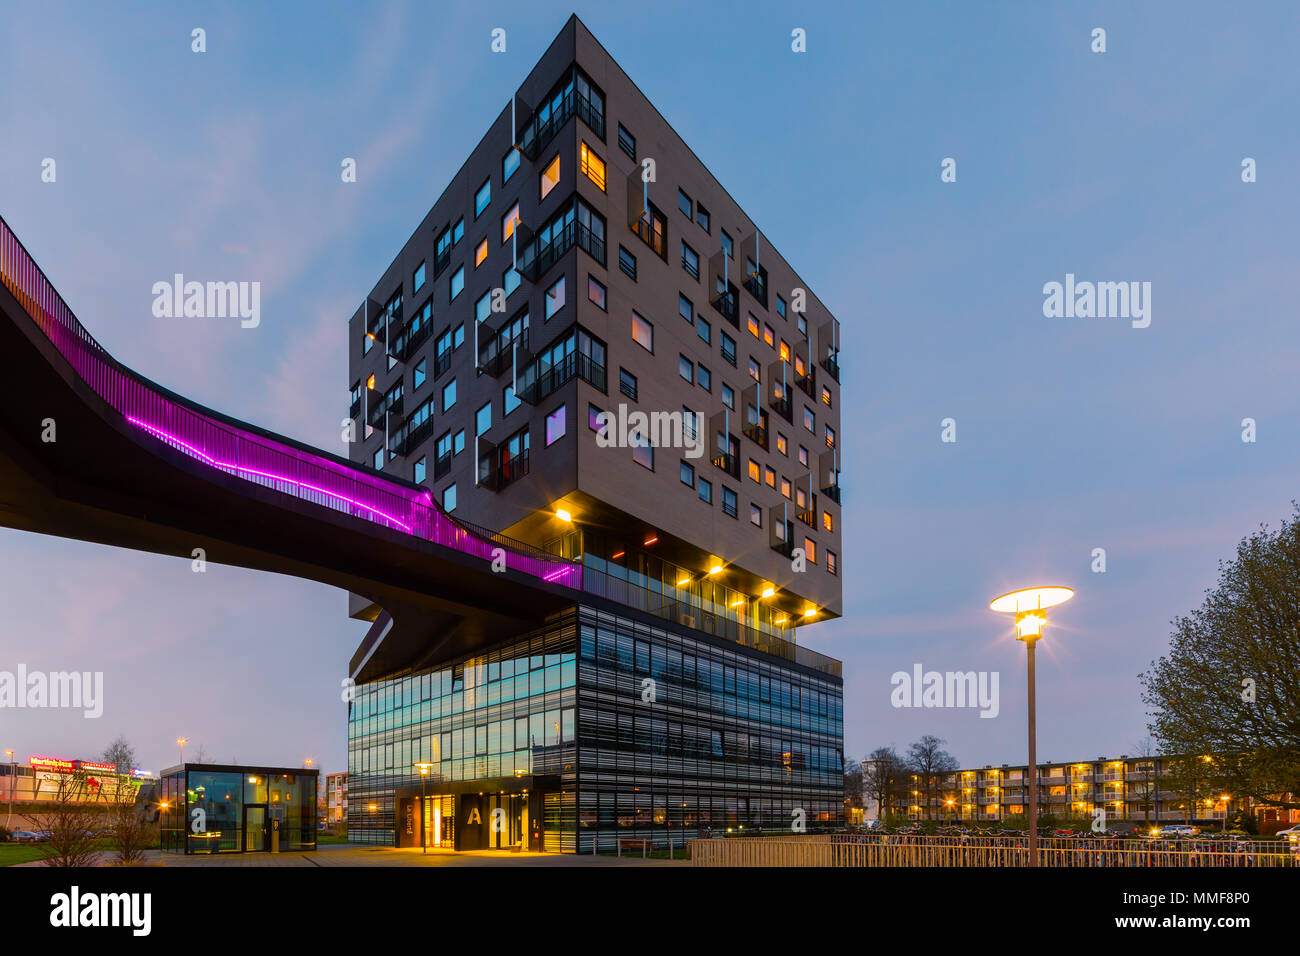 The modern Apollo hotel in the La Liberte building in Groningen, the Netherlands Stock Photo